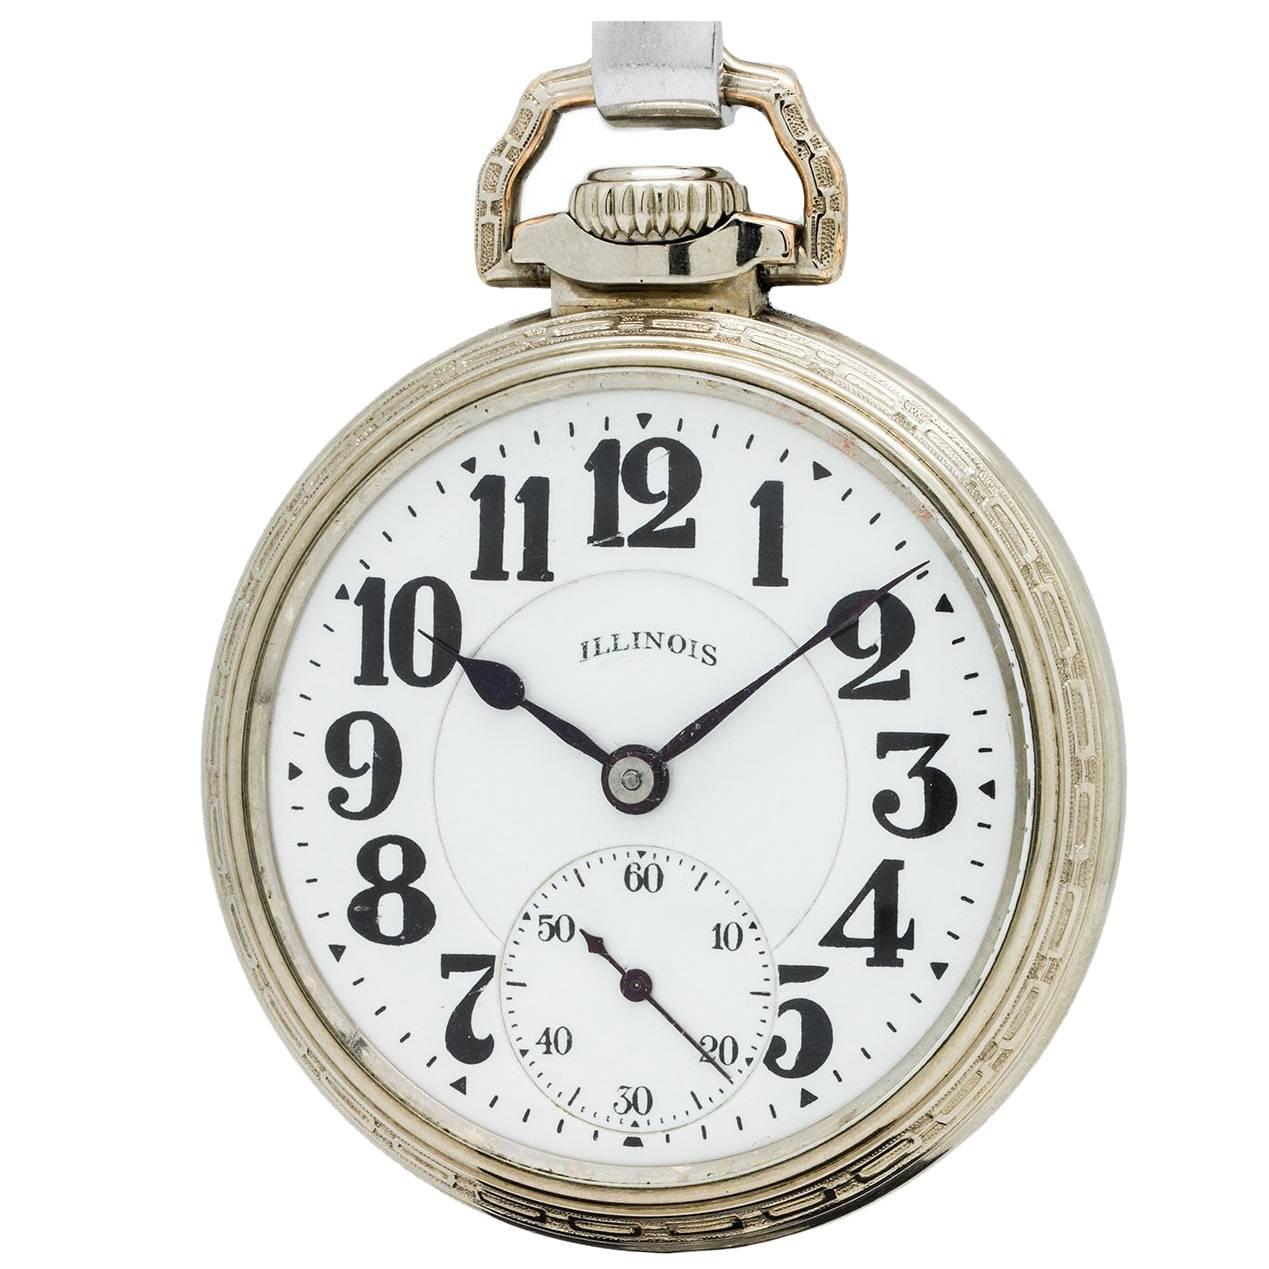 Illinois 16-S Bunn Special 60 Hour Pocket Watch, circa 1929 For Sale